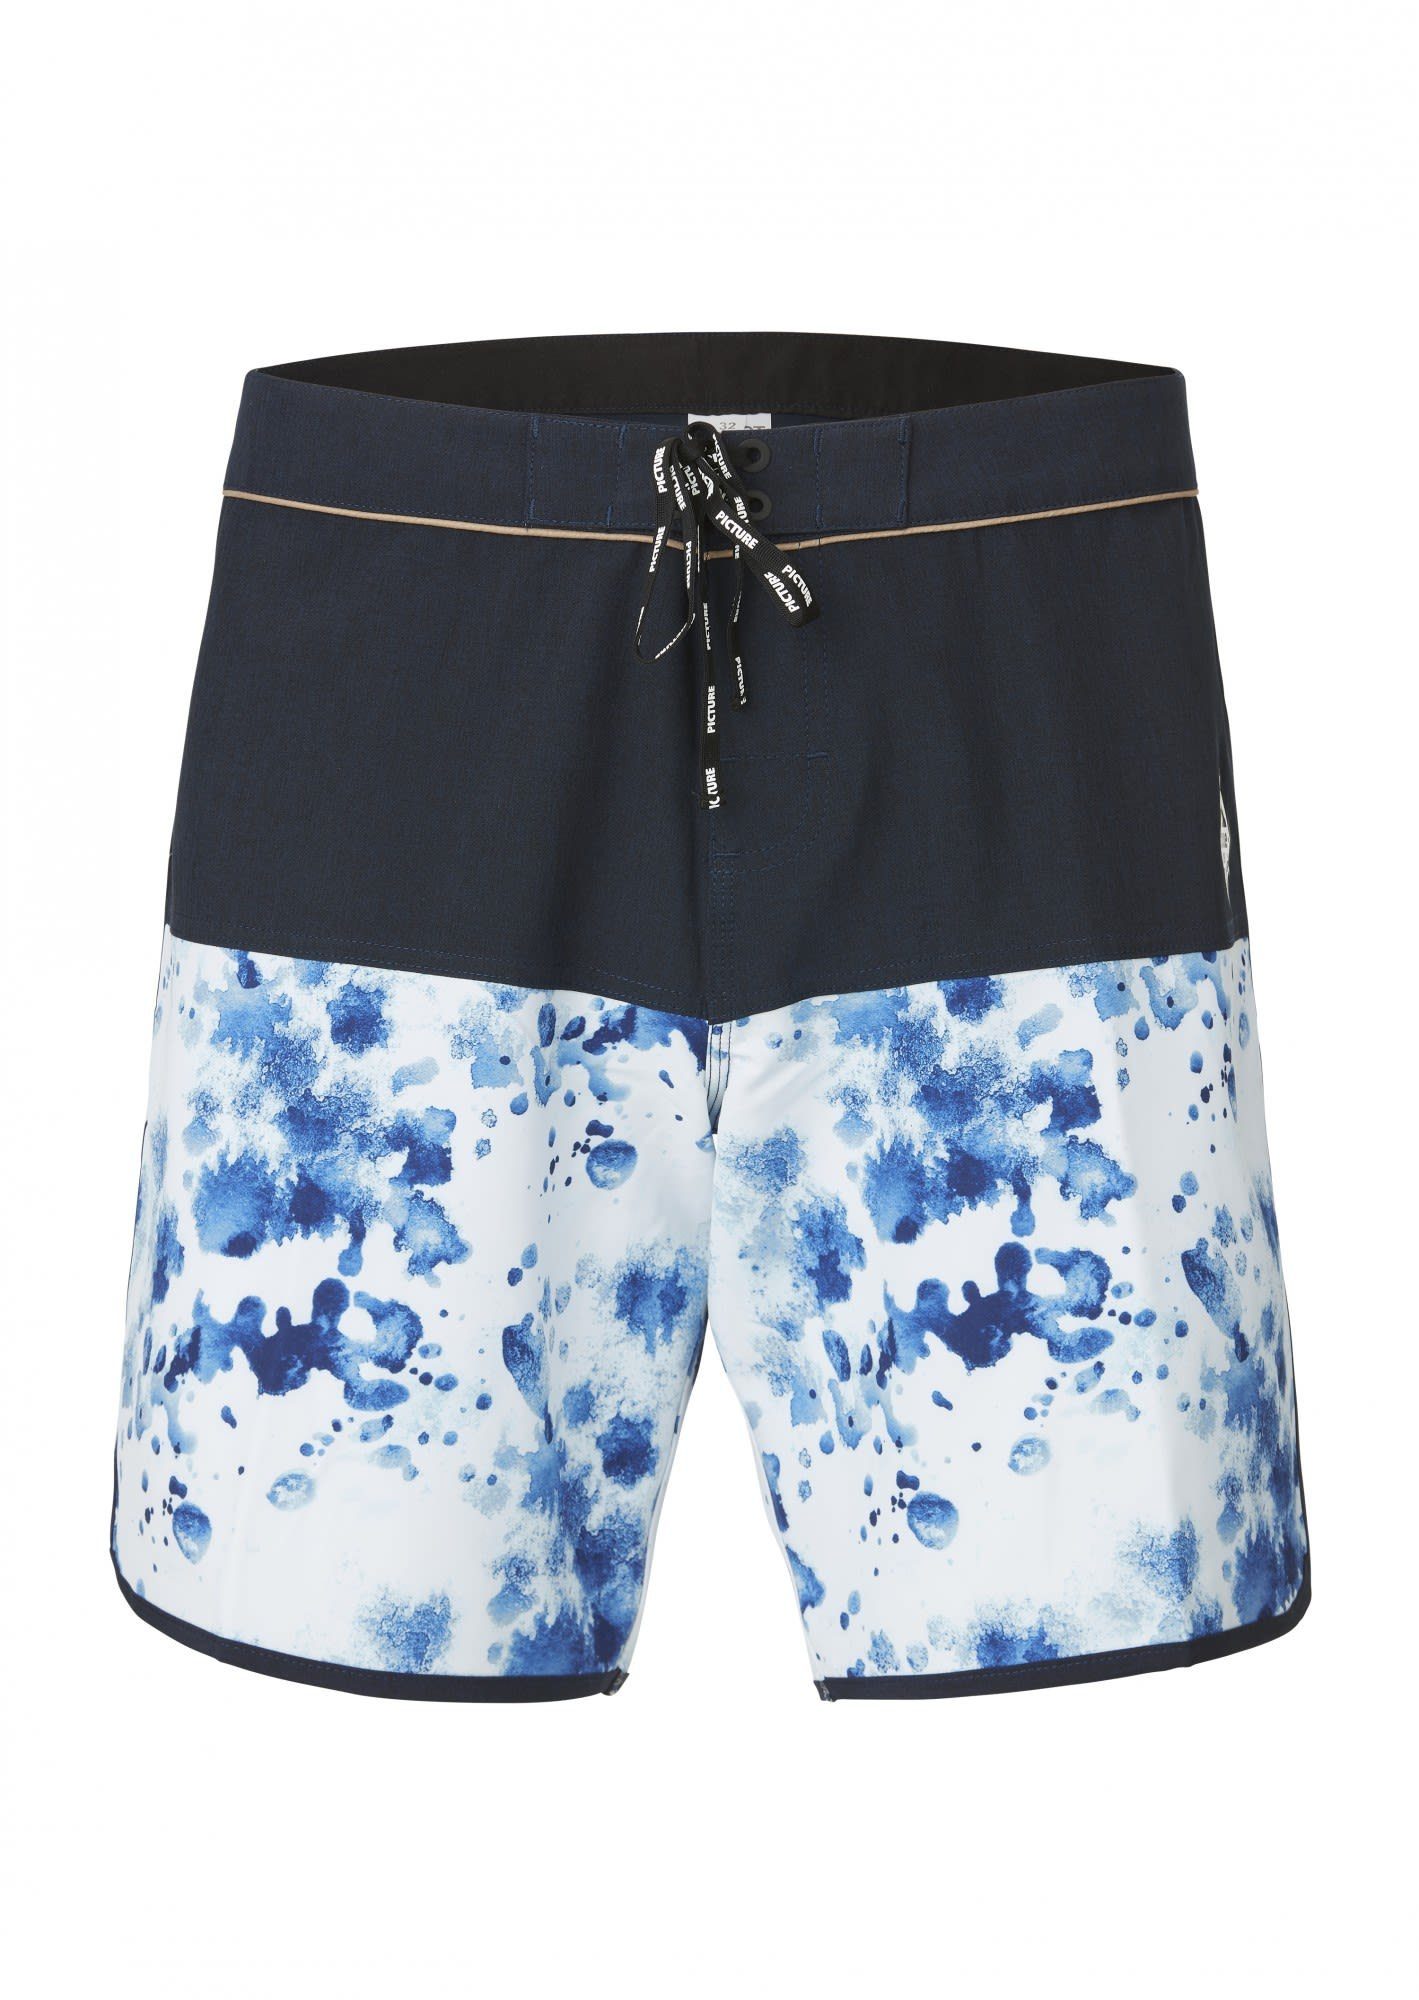 Picture Strandshorts Picture 17 Andy Ocean Herren M Boardshorts Shorts